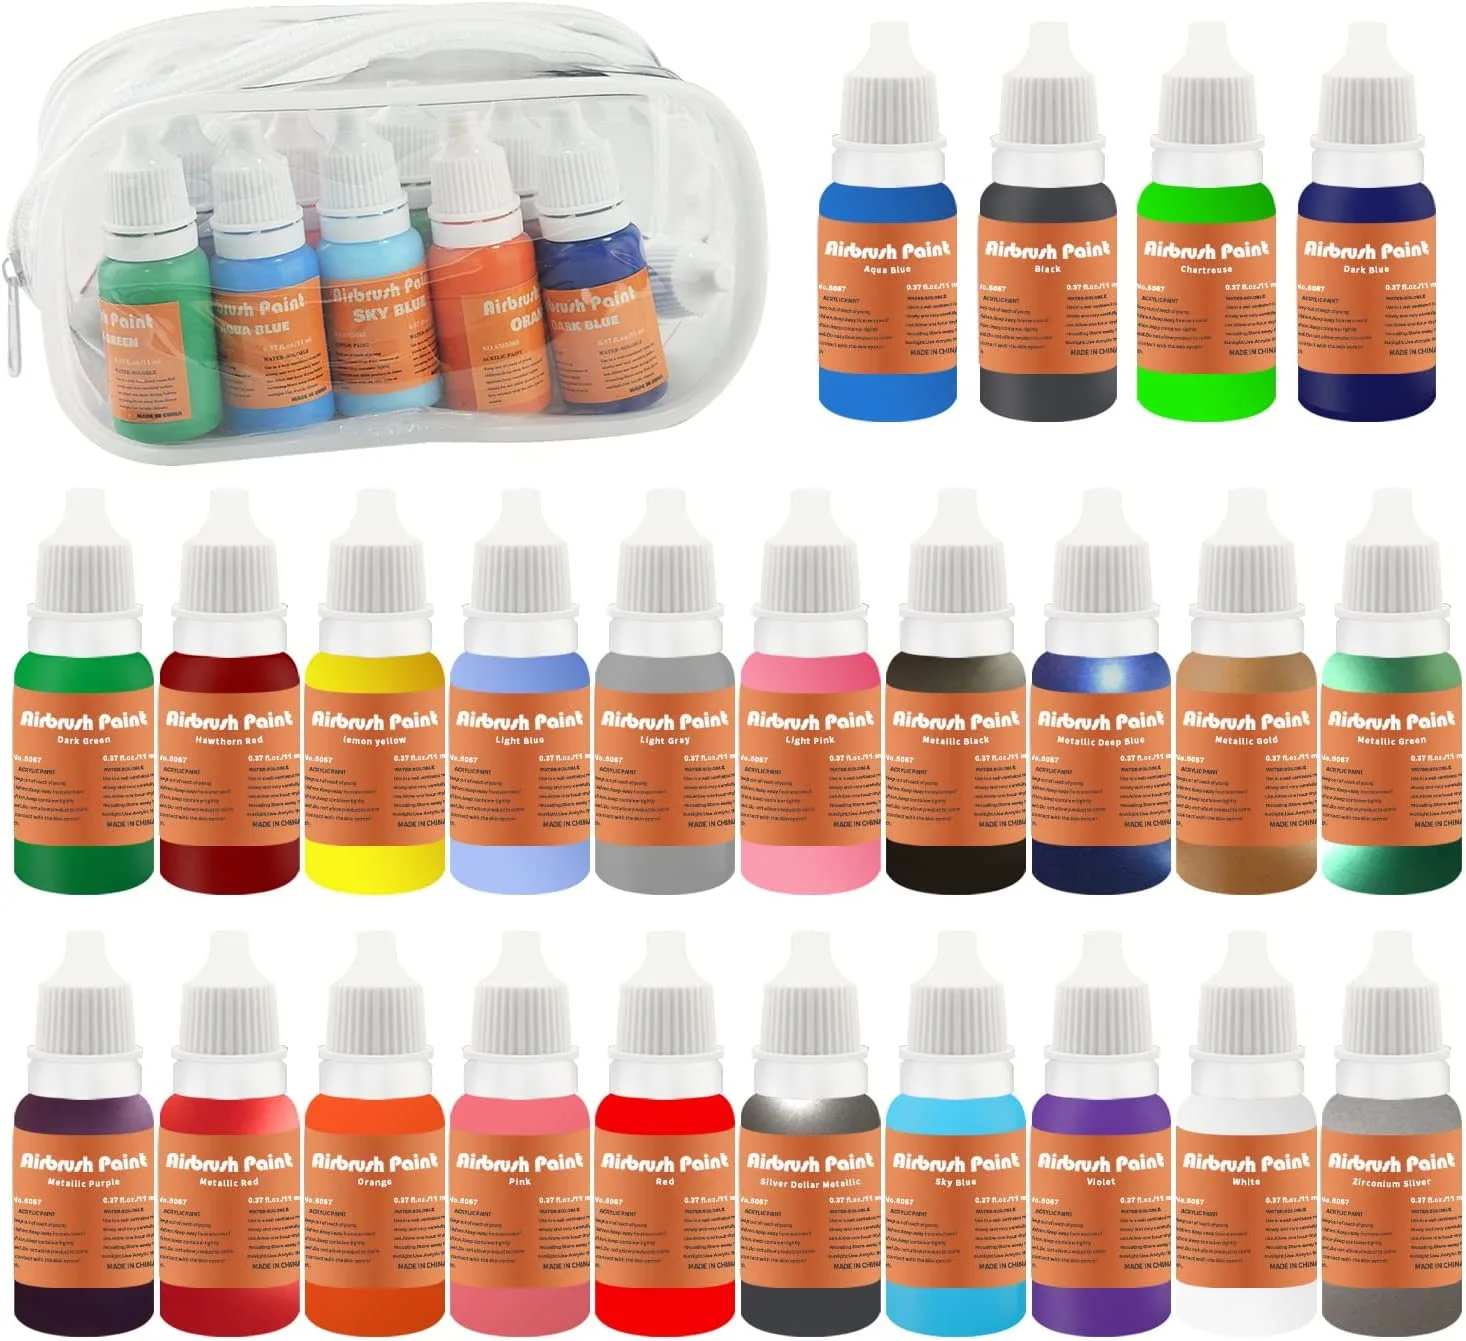 24 Colors Quick Drying Water Based Airbrush Paint,12x11ml Airbrush Paint Set of Acrylic Paint Include 8 Color Metallic Paint with 100ml Airbrush Thinner